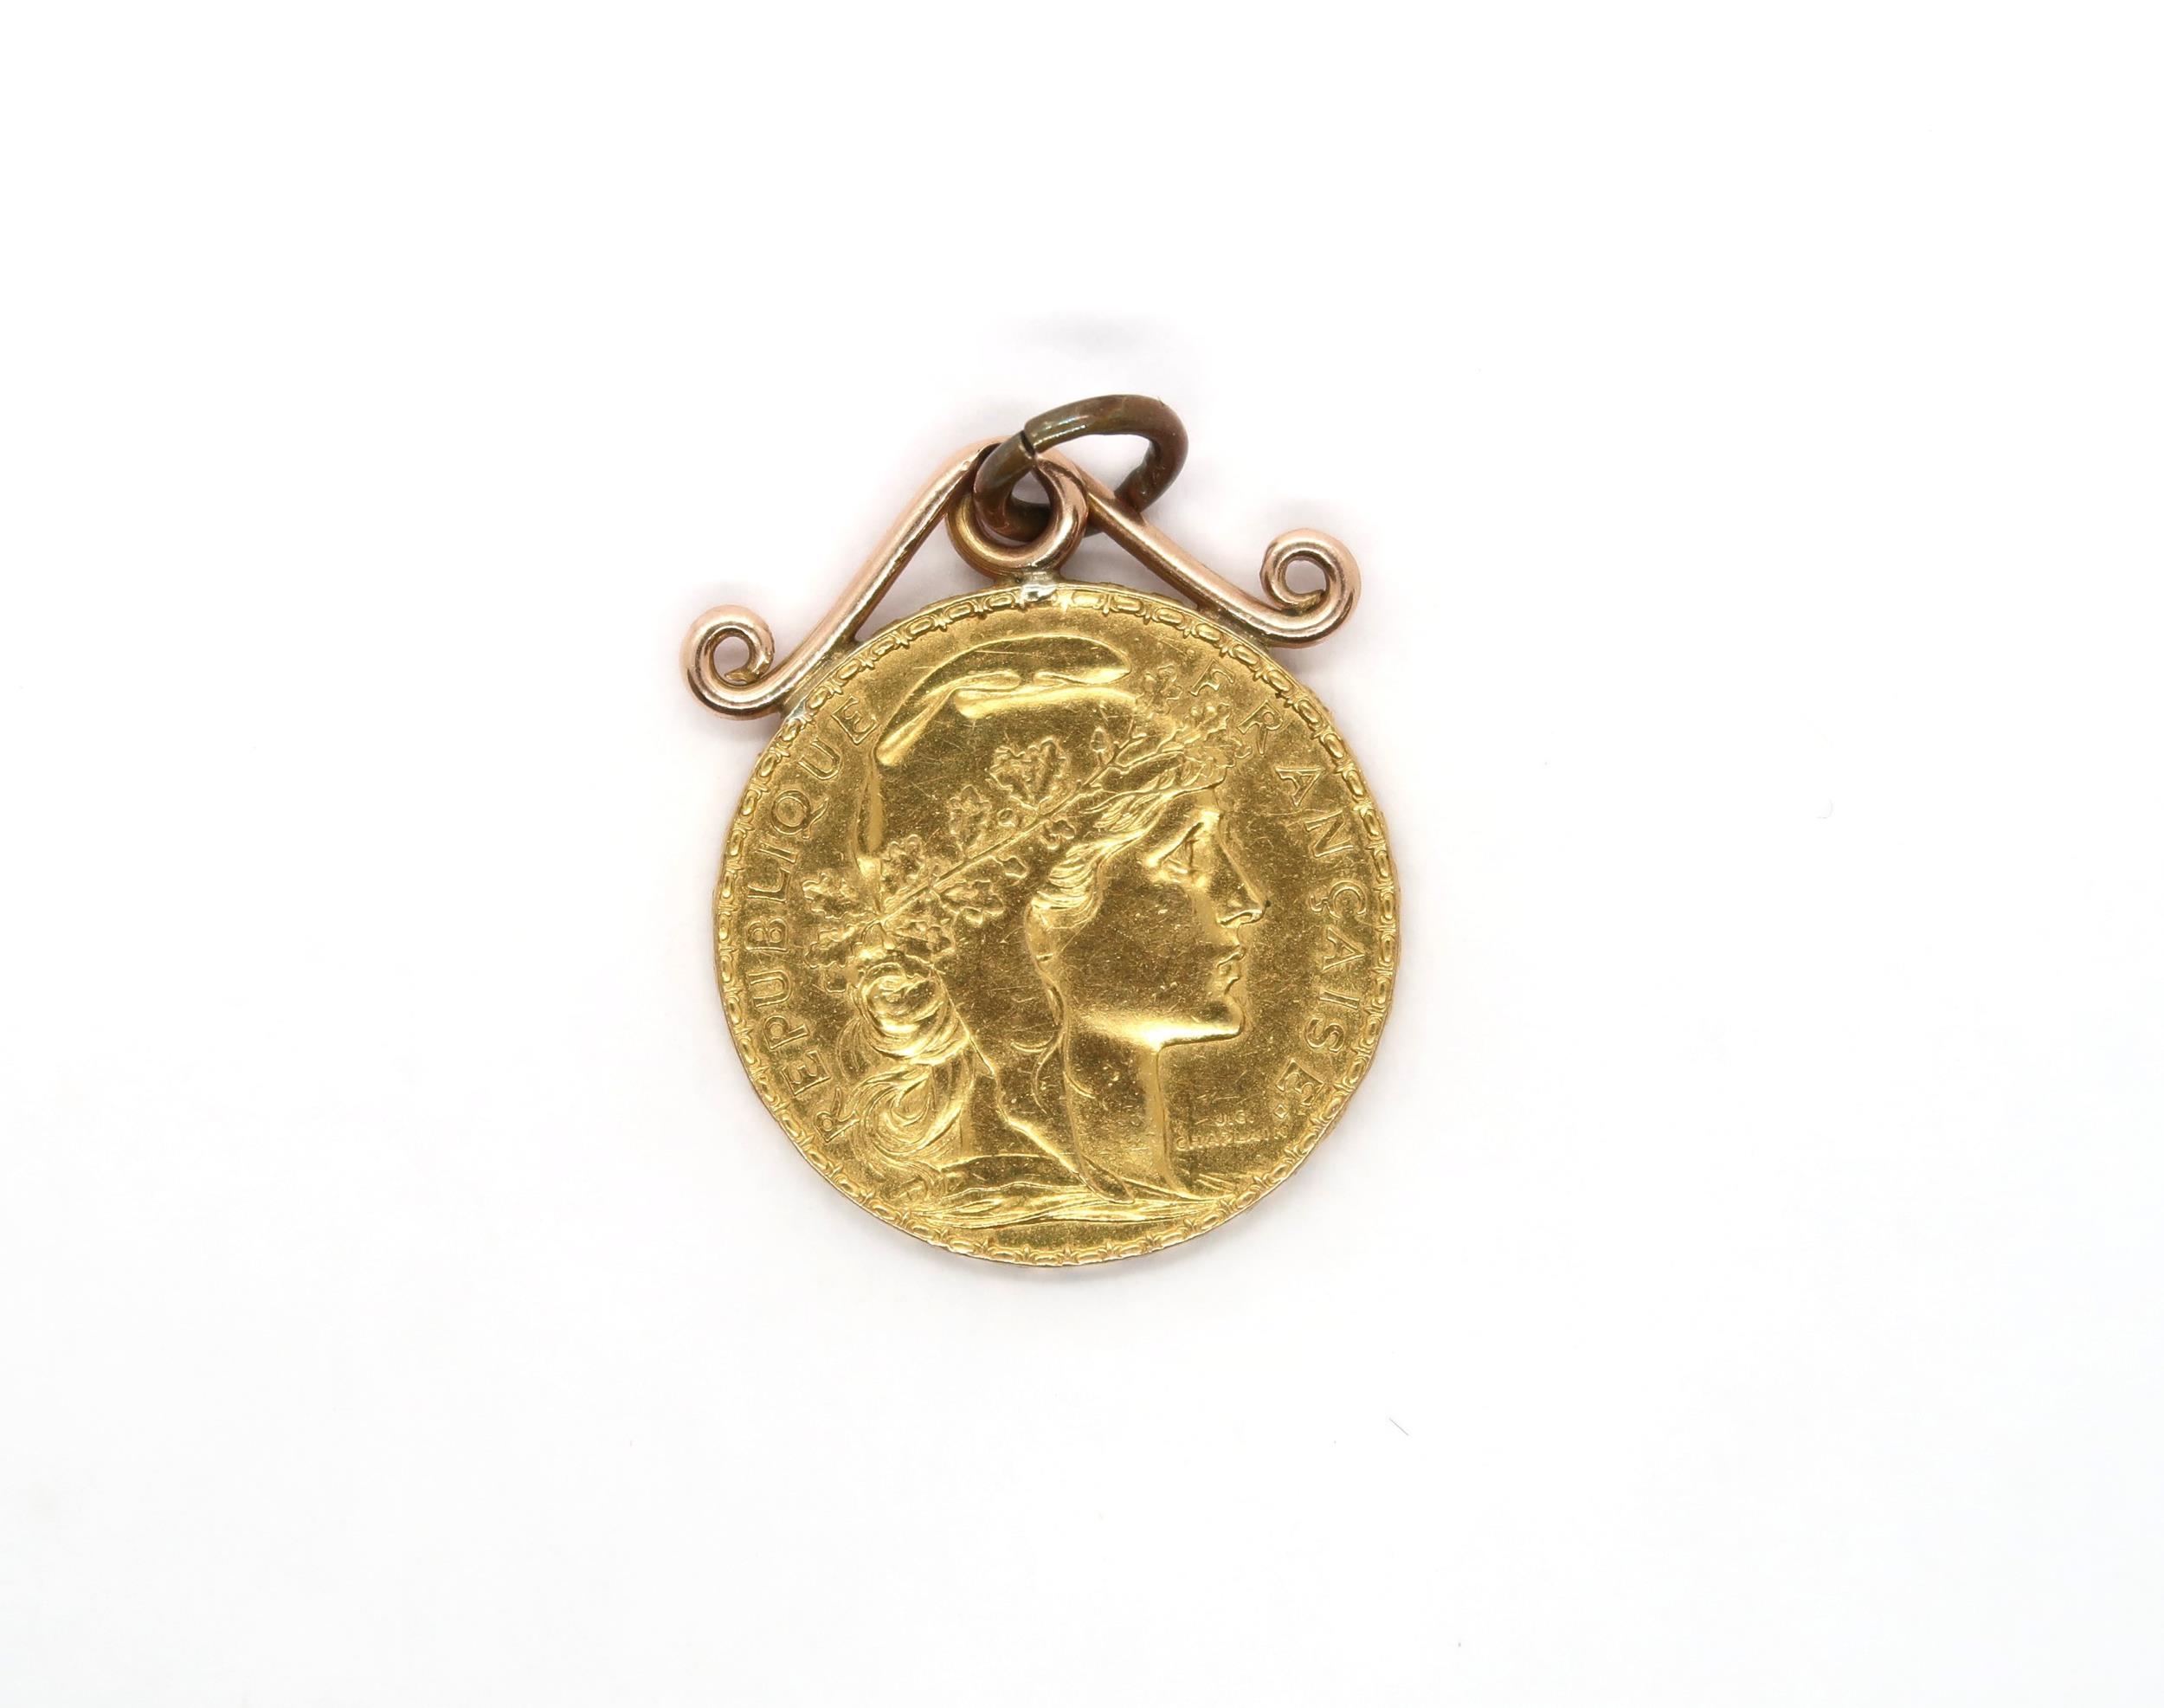 A 1913 gold 20 Franc coin in a mount - total weight approx 7 grams - Image 2 of 2